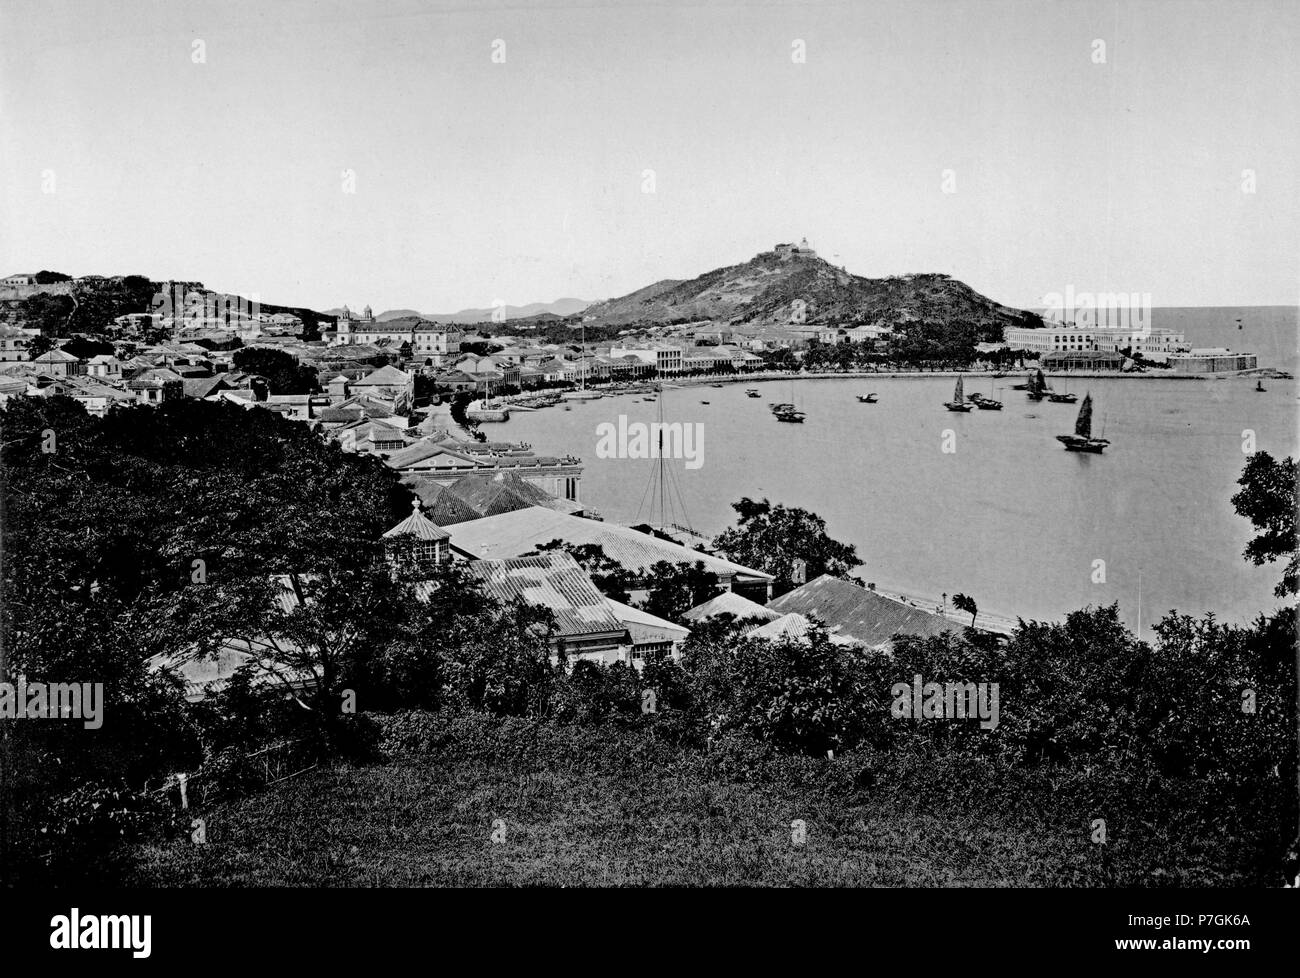 English: John Thomson: MACAO, in ancient times a small island off the mainland of Hiang-shan in the Kwang-tung Province, has since been united to the coast by a sand-bar. This occurrence so disgusted the Chinese, that in I5 7 3l shortly after the troubles which the settlement of a few Portuguese at Macao involved, they built a barrier across the bar, with a view to exclude the foreigners from intruding into the interior of the country. The Chinese account of the early Macao Portuguese, and of the manner in which the colony was established, differs materially from that supplied by the Portugues Stock Photo